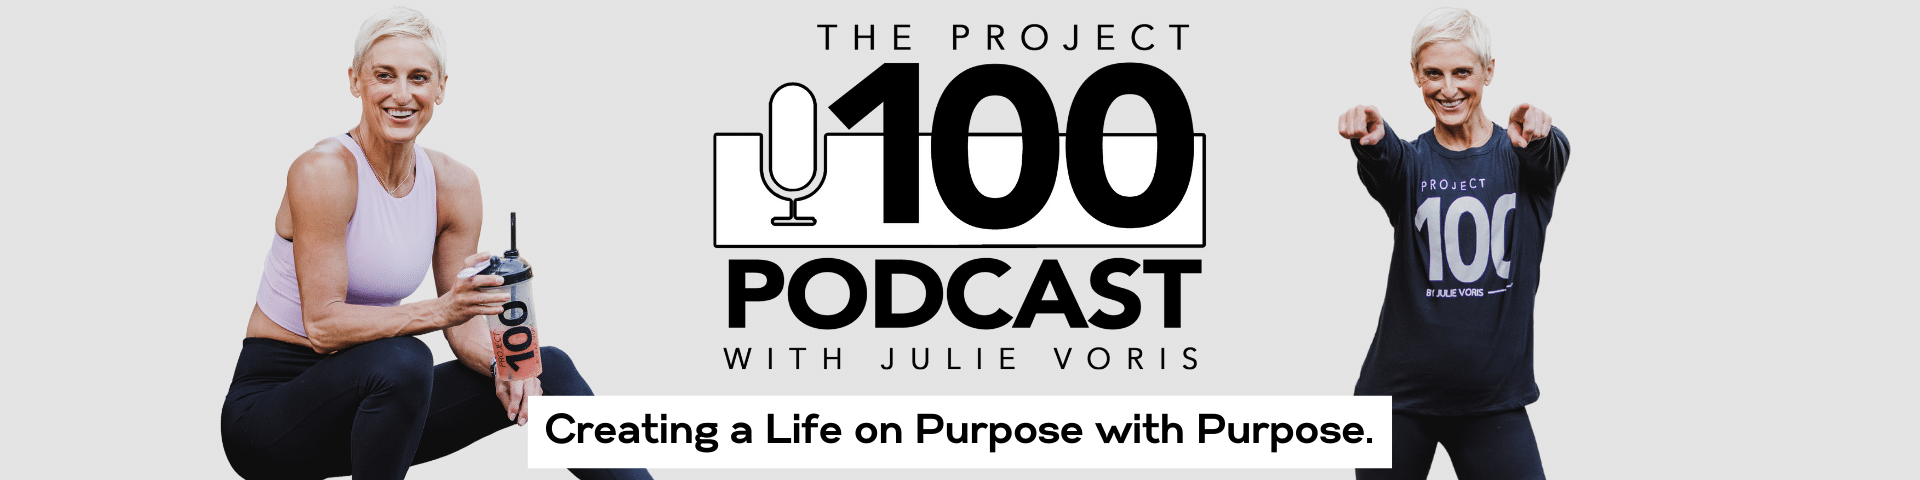 Project100 Podcast